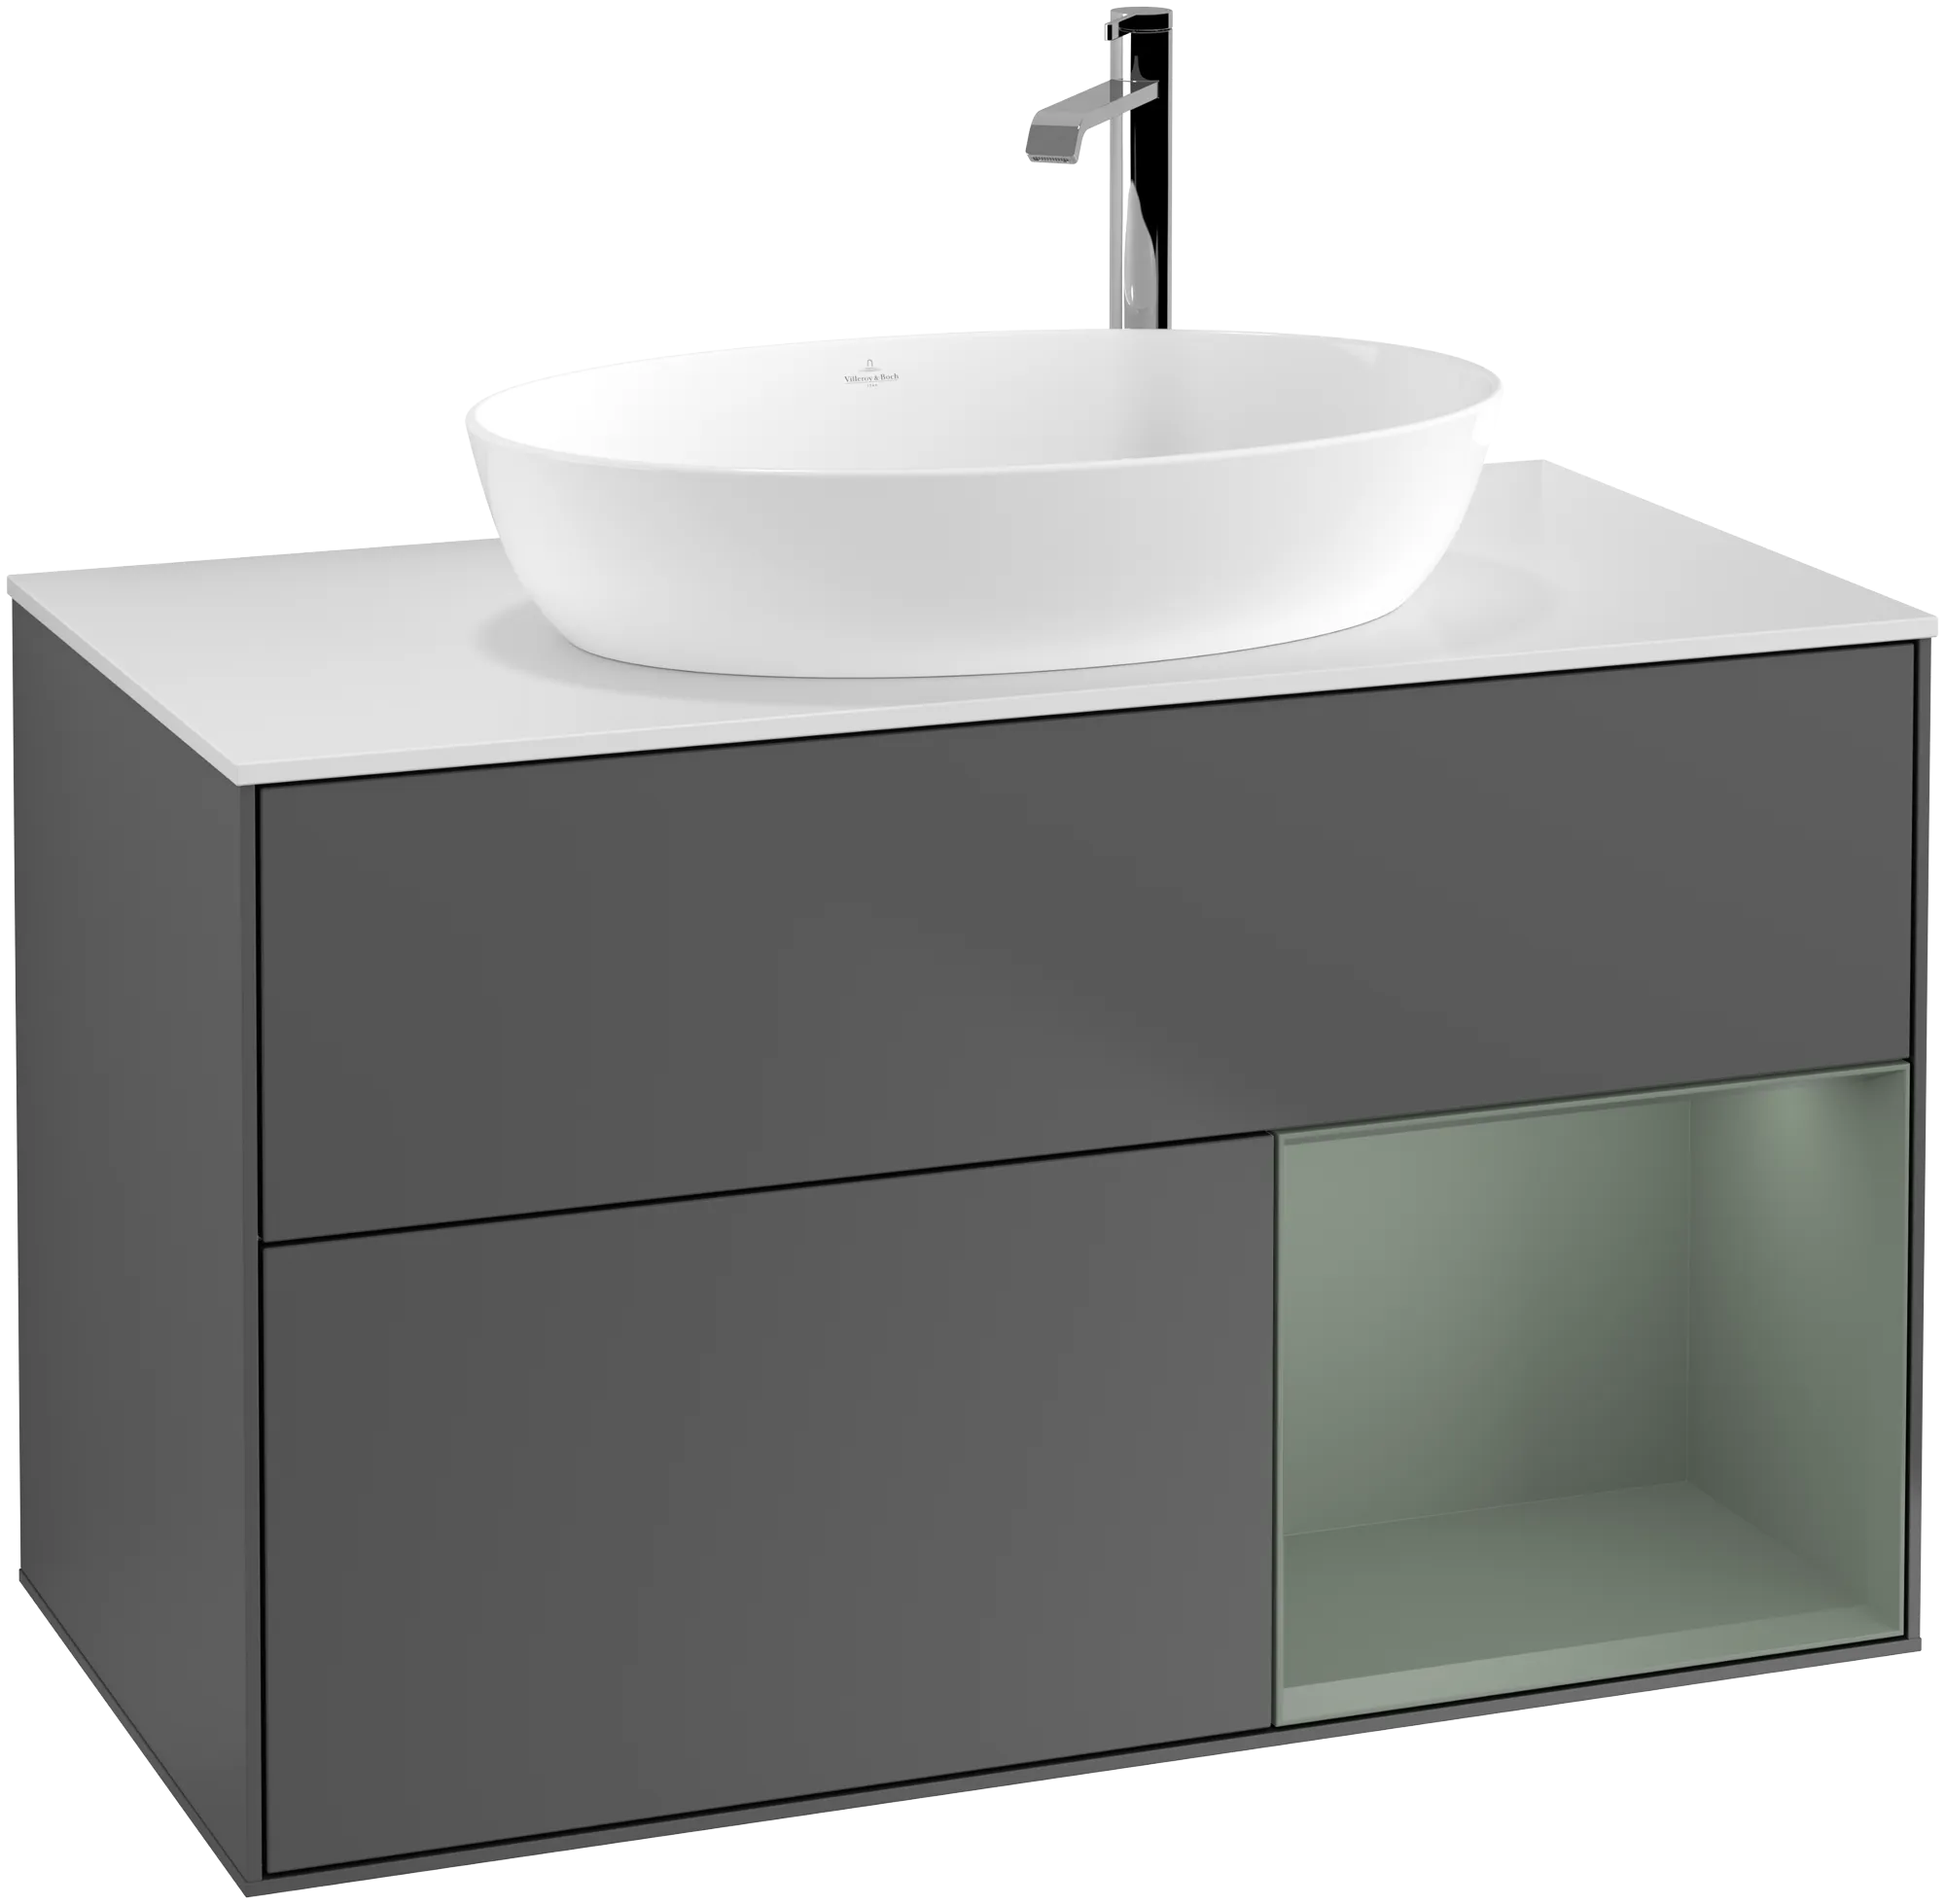 Зображення з  VILLEROY BOCH Finion Vanity unit, with lighting, 2 pull-out compartments, 1000 x 603 x 501 mm, Anthracite Matt Lacquer / Olive Matt Lacquer / Glass White Matt #G901GMGK